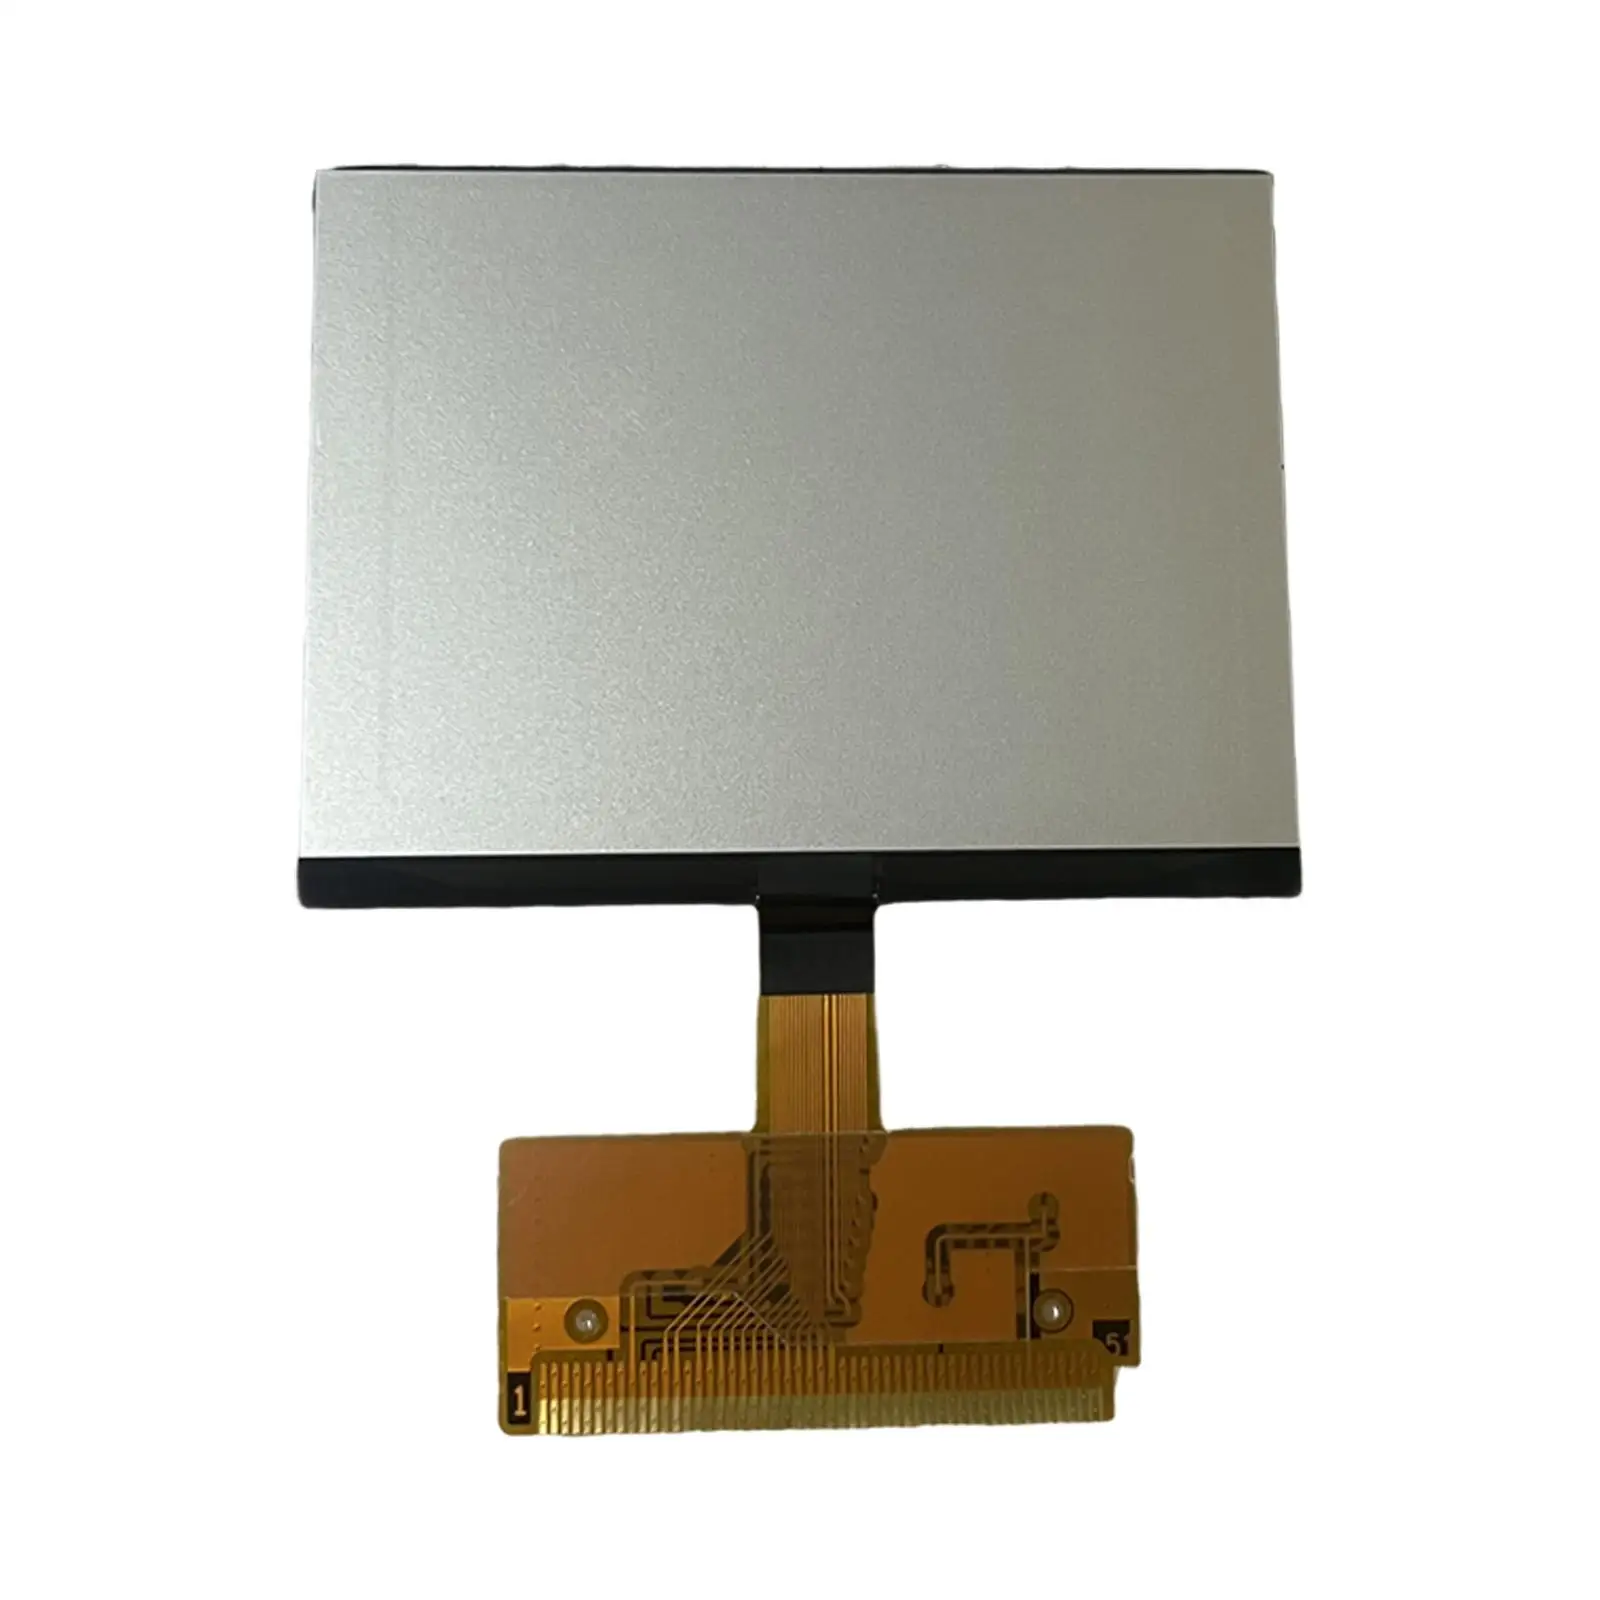 LCD Display Replacement Durable Vehicle Spare Parts for Audi A3 A4 Vdo Easily